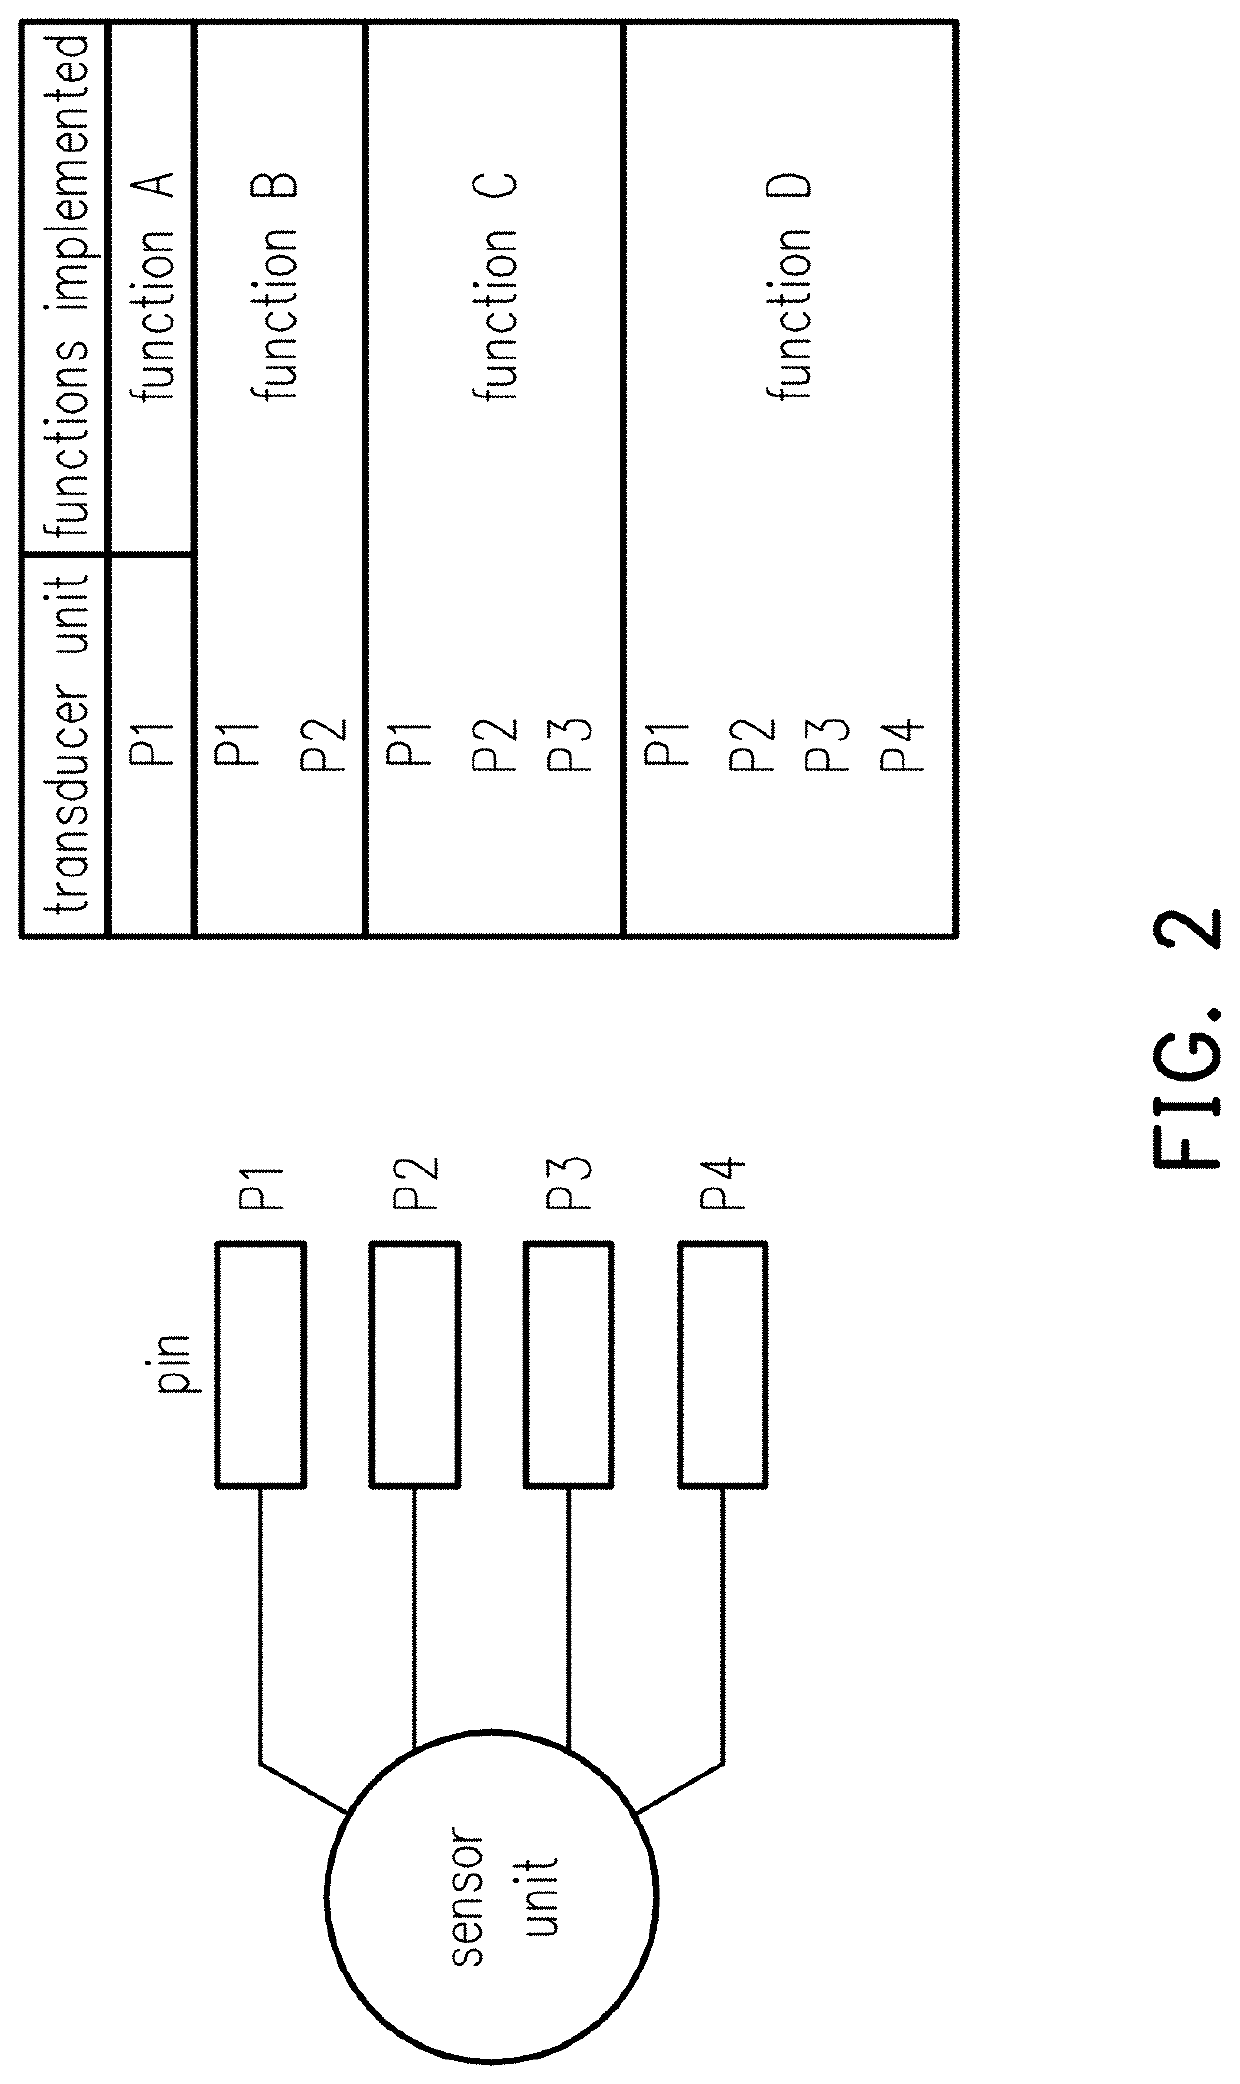 Multi-modal field-programmable metamorphic sensor and signal acquisition system